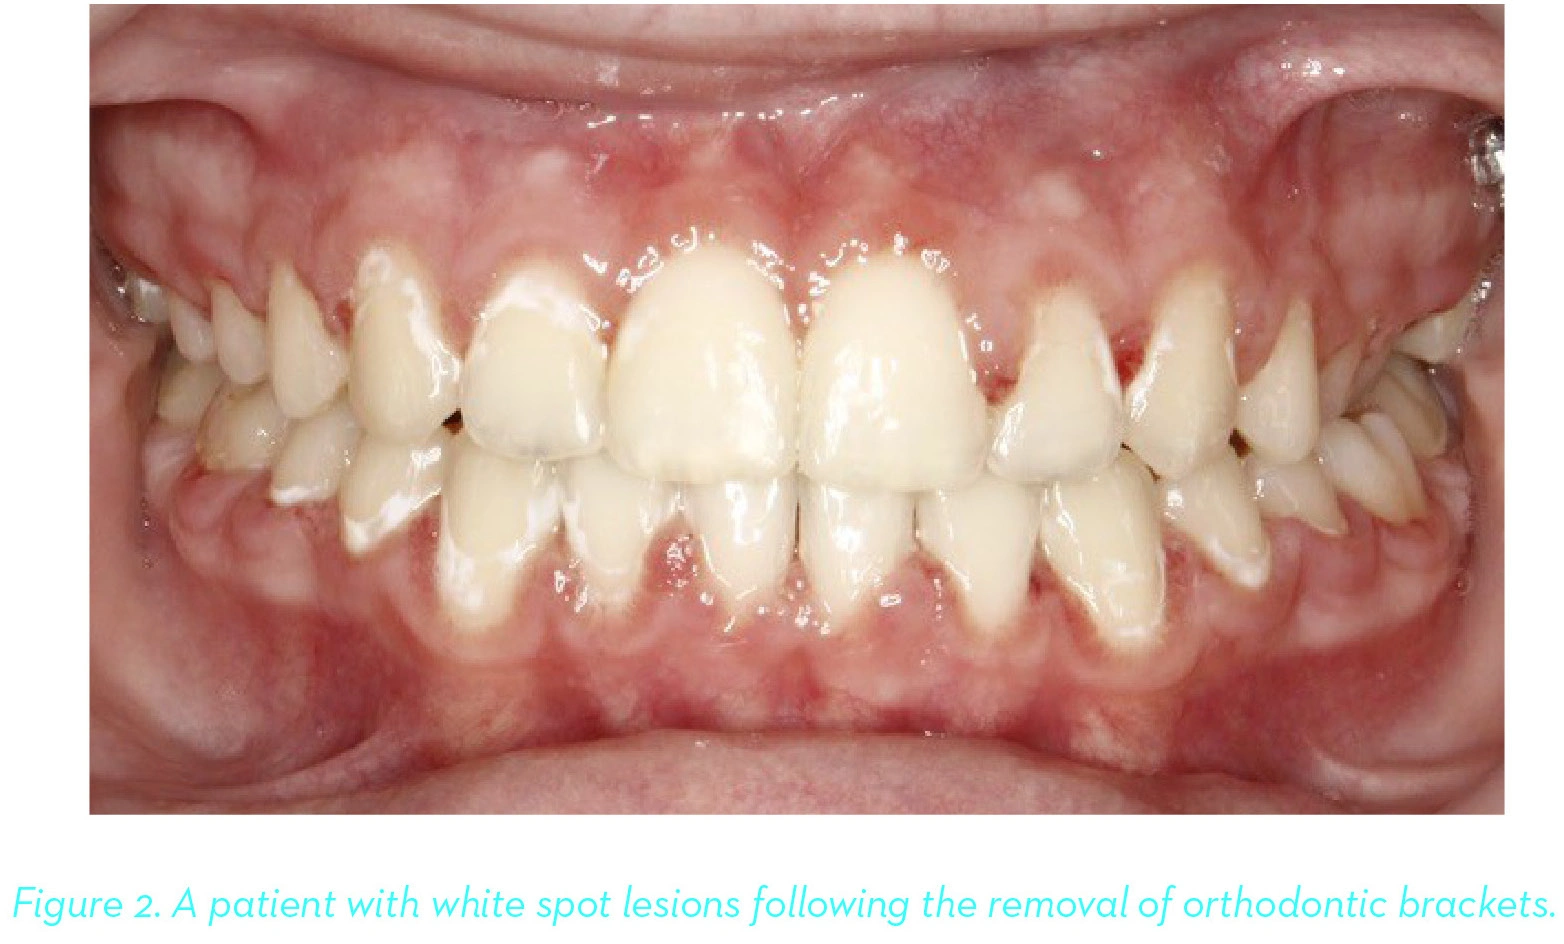 A patient with white spot lesions following the removal of orthodontic brackets